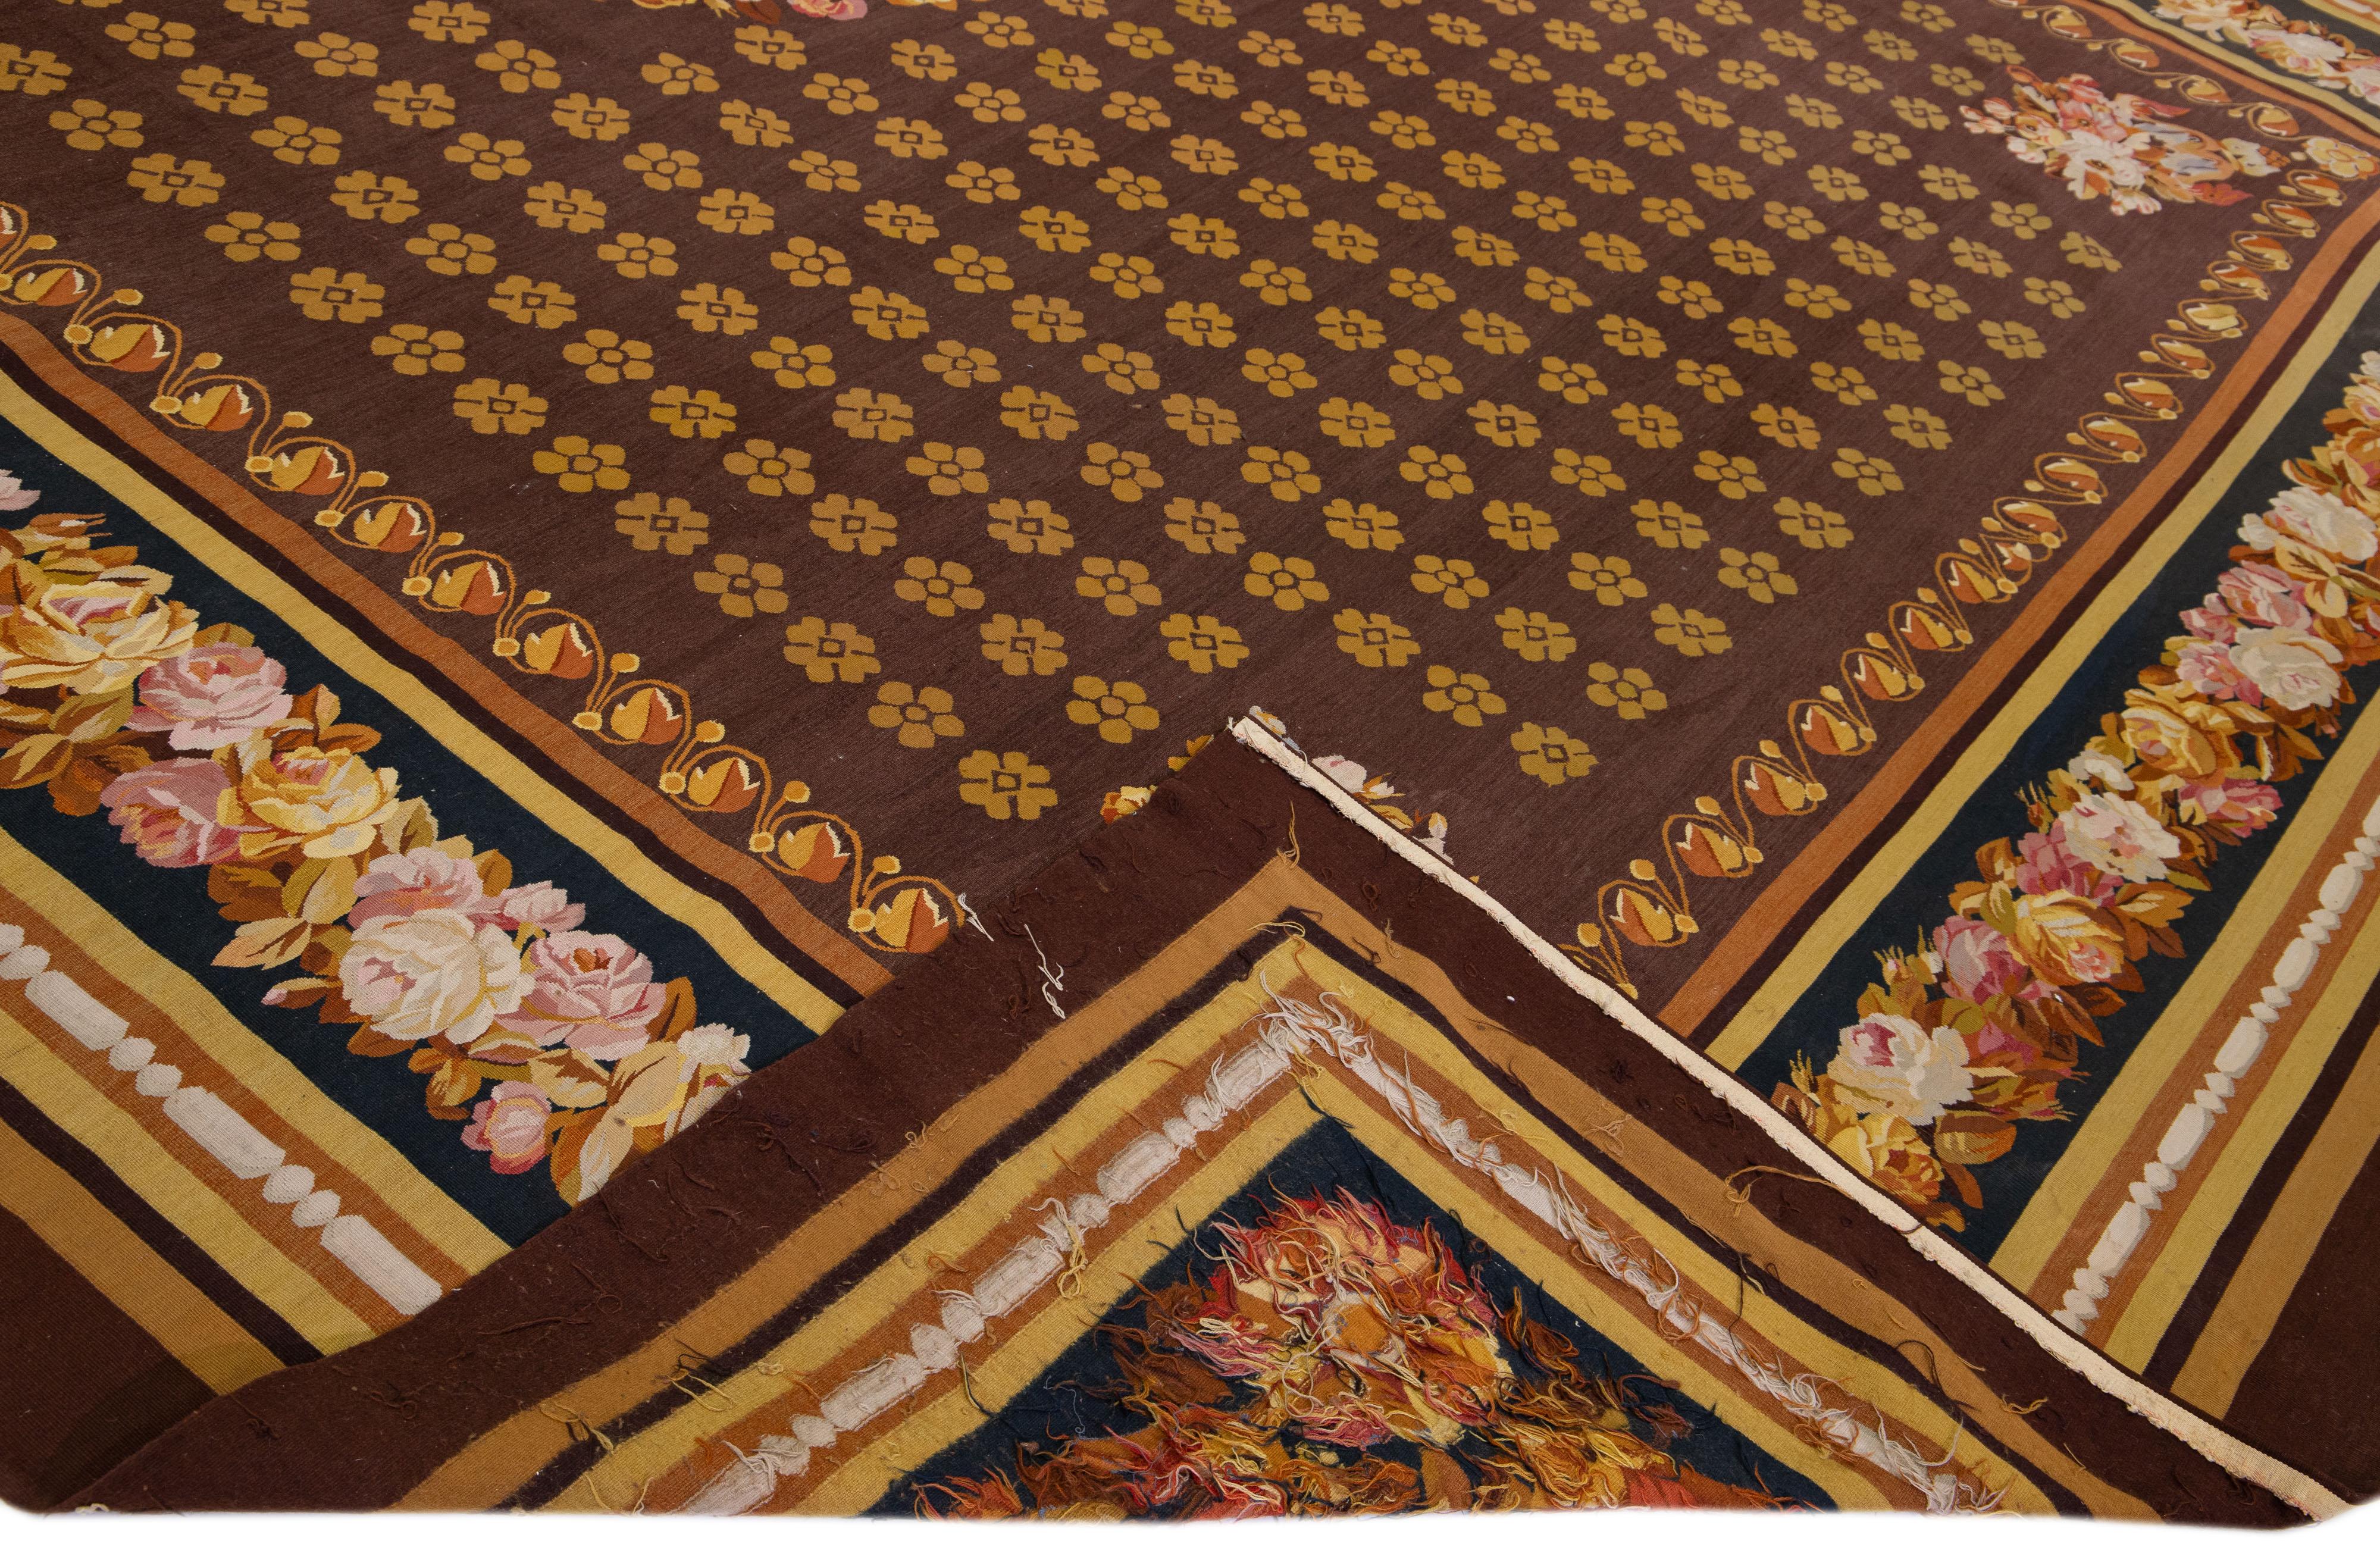 Beautiful Vintage Aubusson needlepoint wool rug with a brown color field. This piece has fine details with an elegant floral pattern throughout the design.

This rug measures 14'8